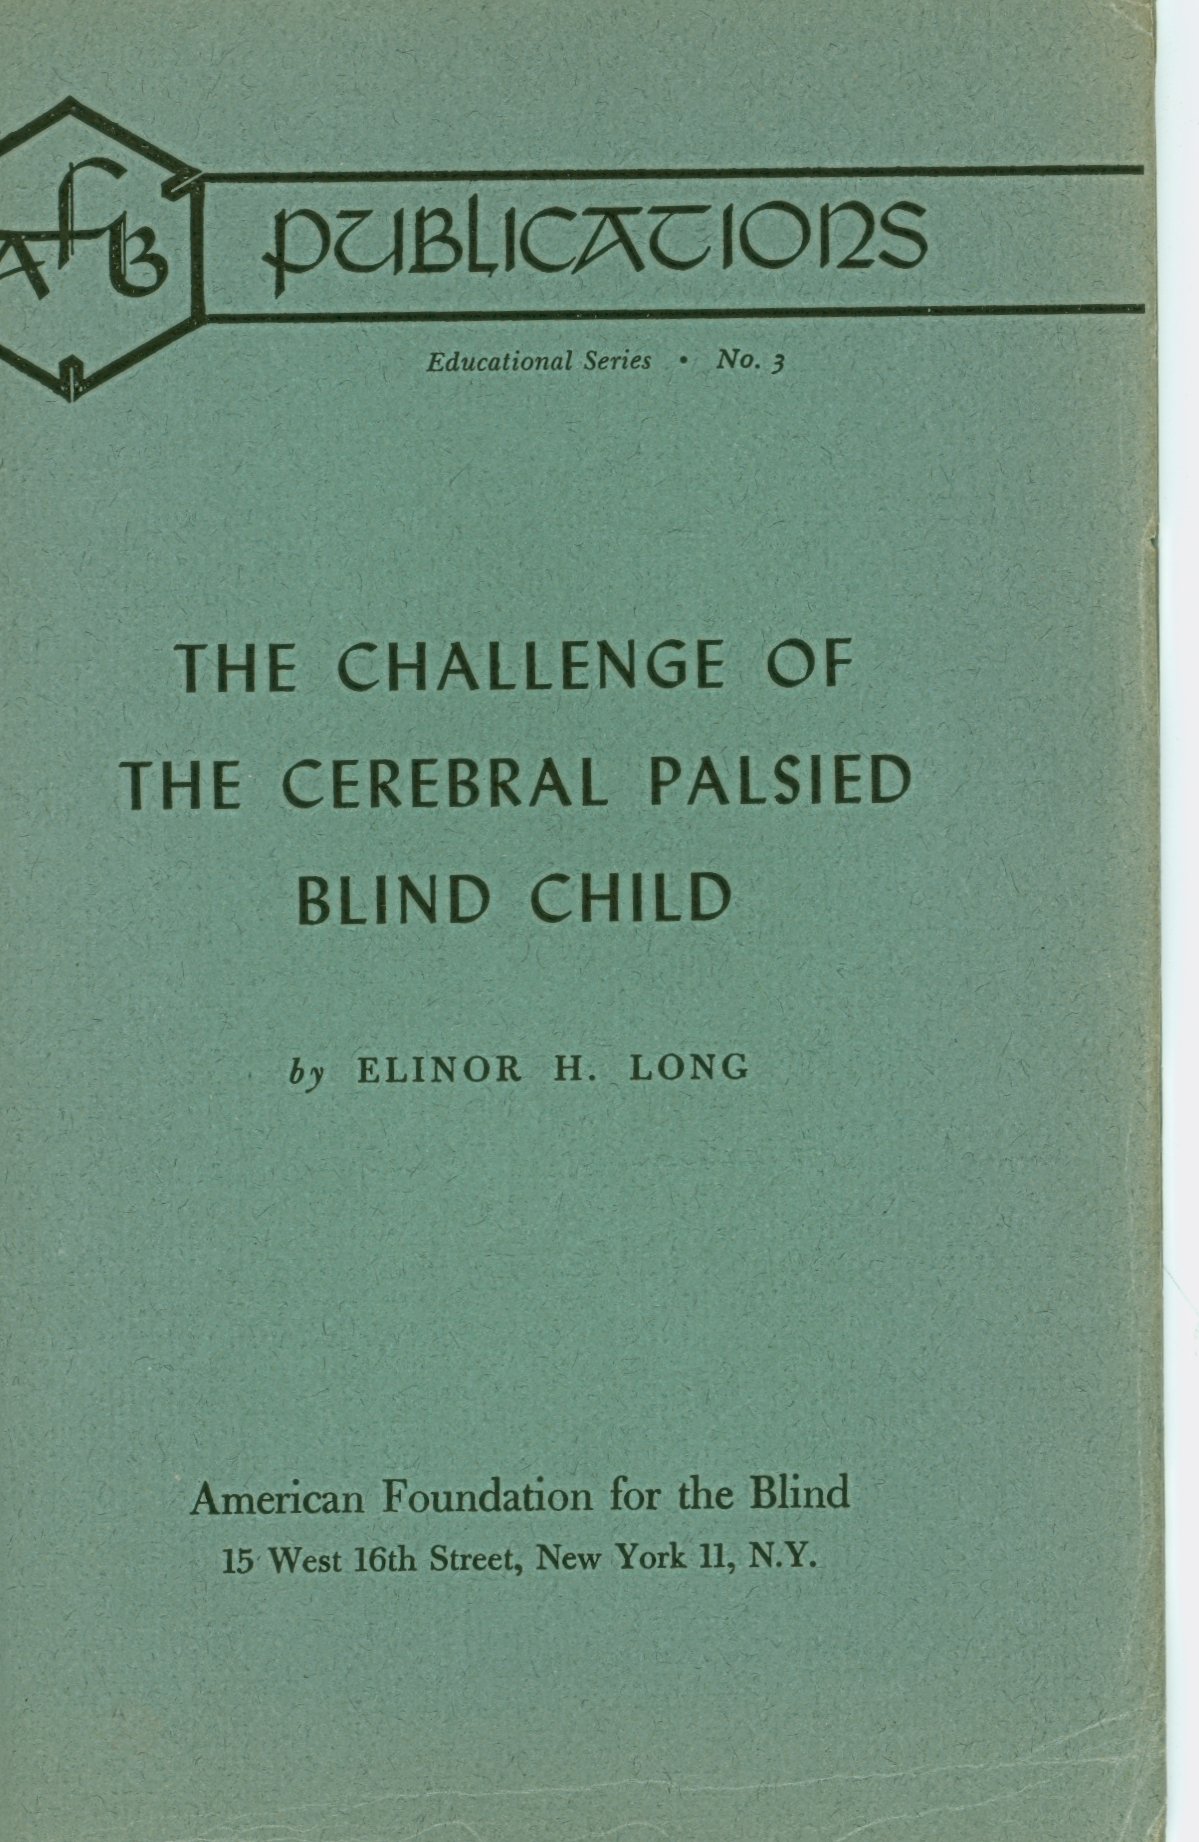 The Challenge of the Cerebral Palsied Blind Child-1